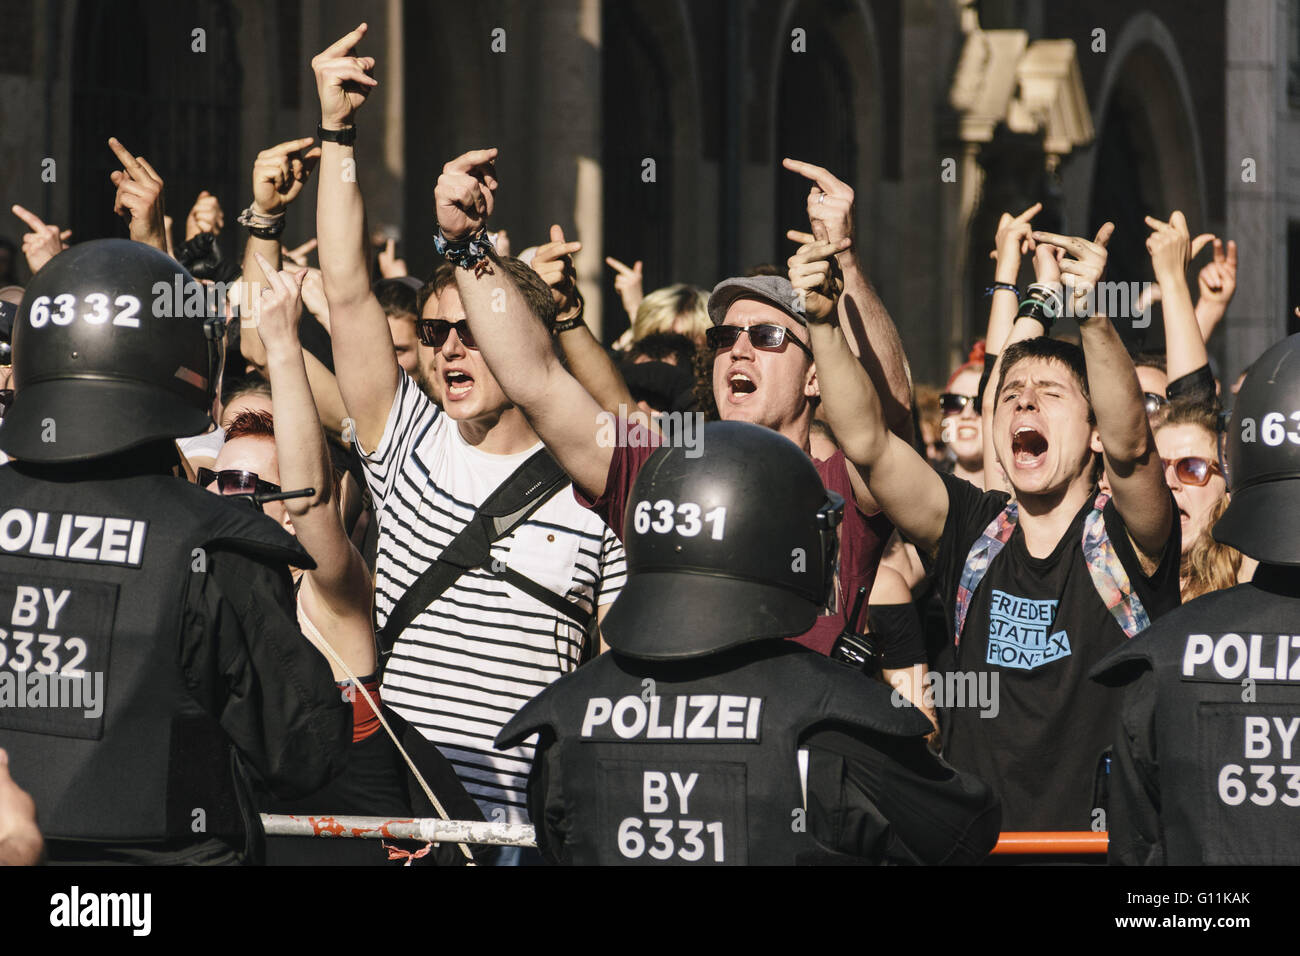 Berlin, Germany. 7th May, 2016. Activists use middel finger in counter protest against the rally being held under the motto 'Merkel muss weg! or 'Merkel must go' organised by far-right group 'We for Berlin & We for Germany.' © Jan Scheunert/ZUMA Wire/Alamy Live News Stock Photo